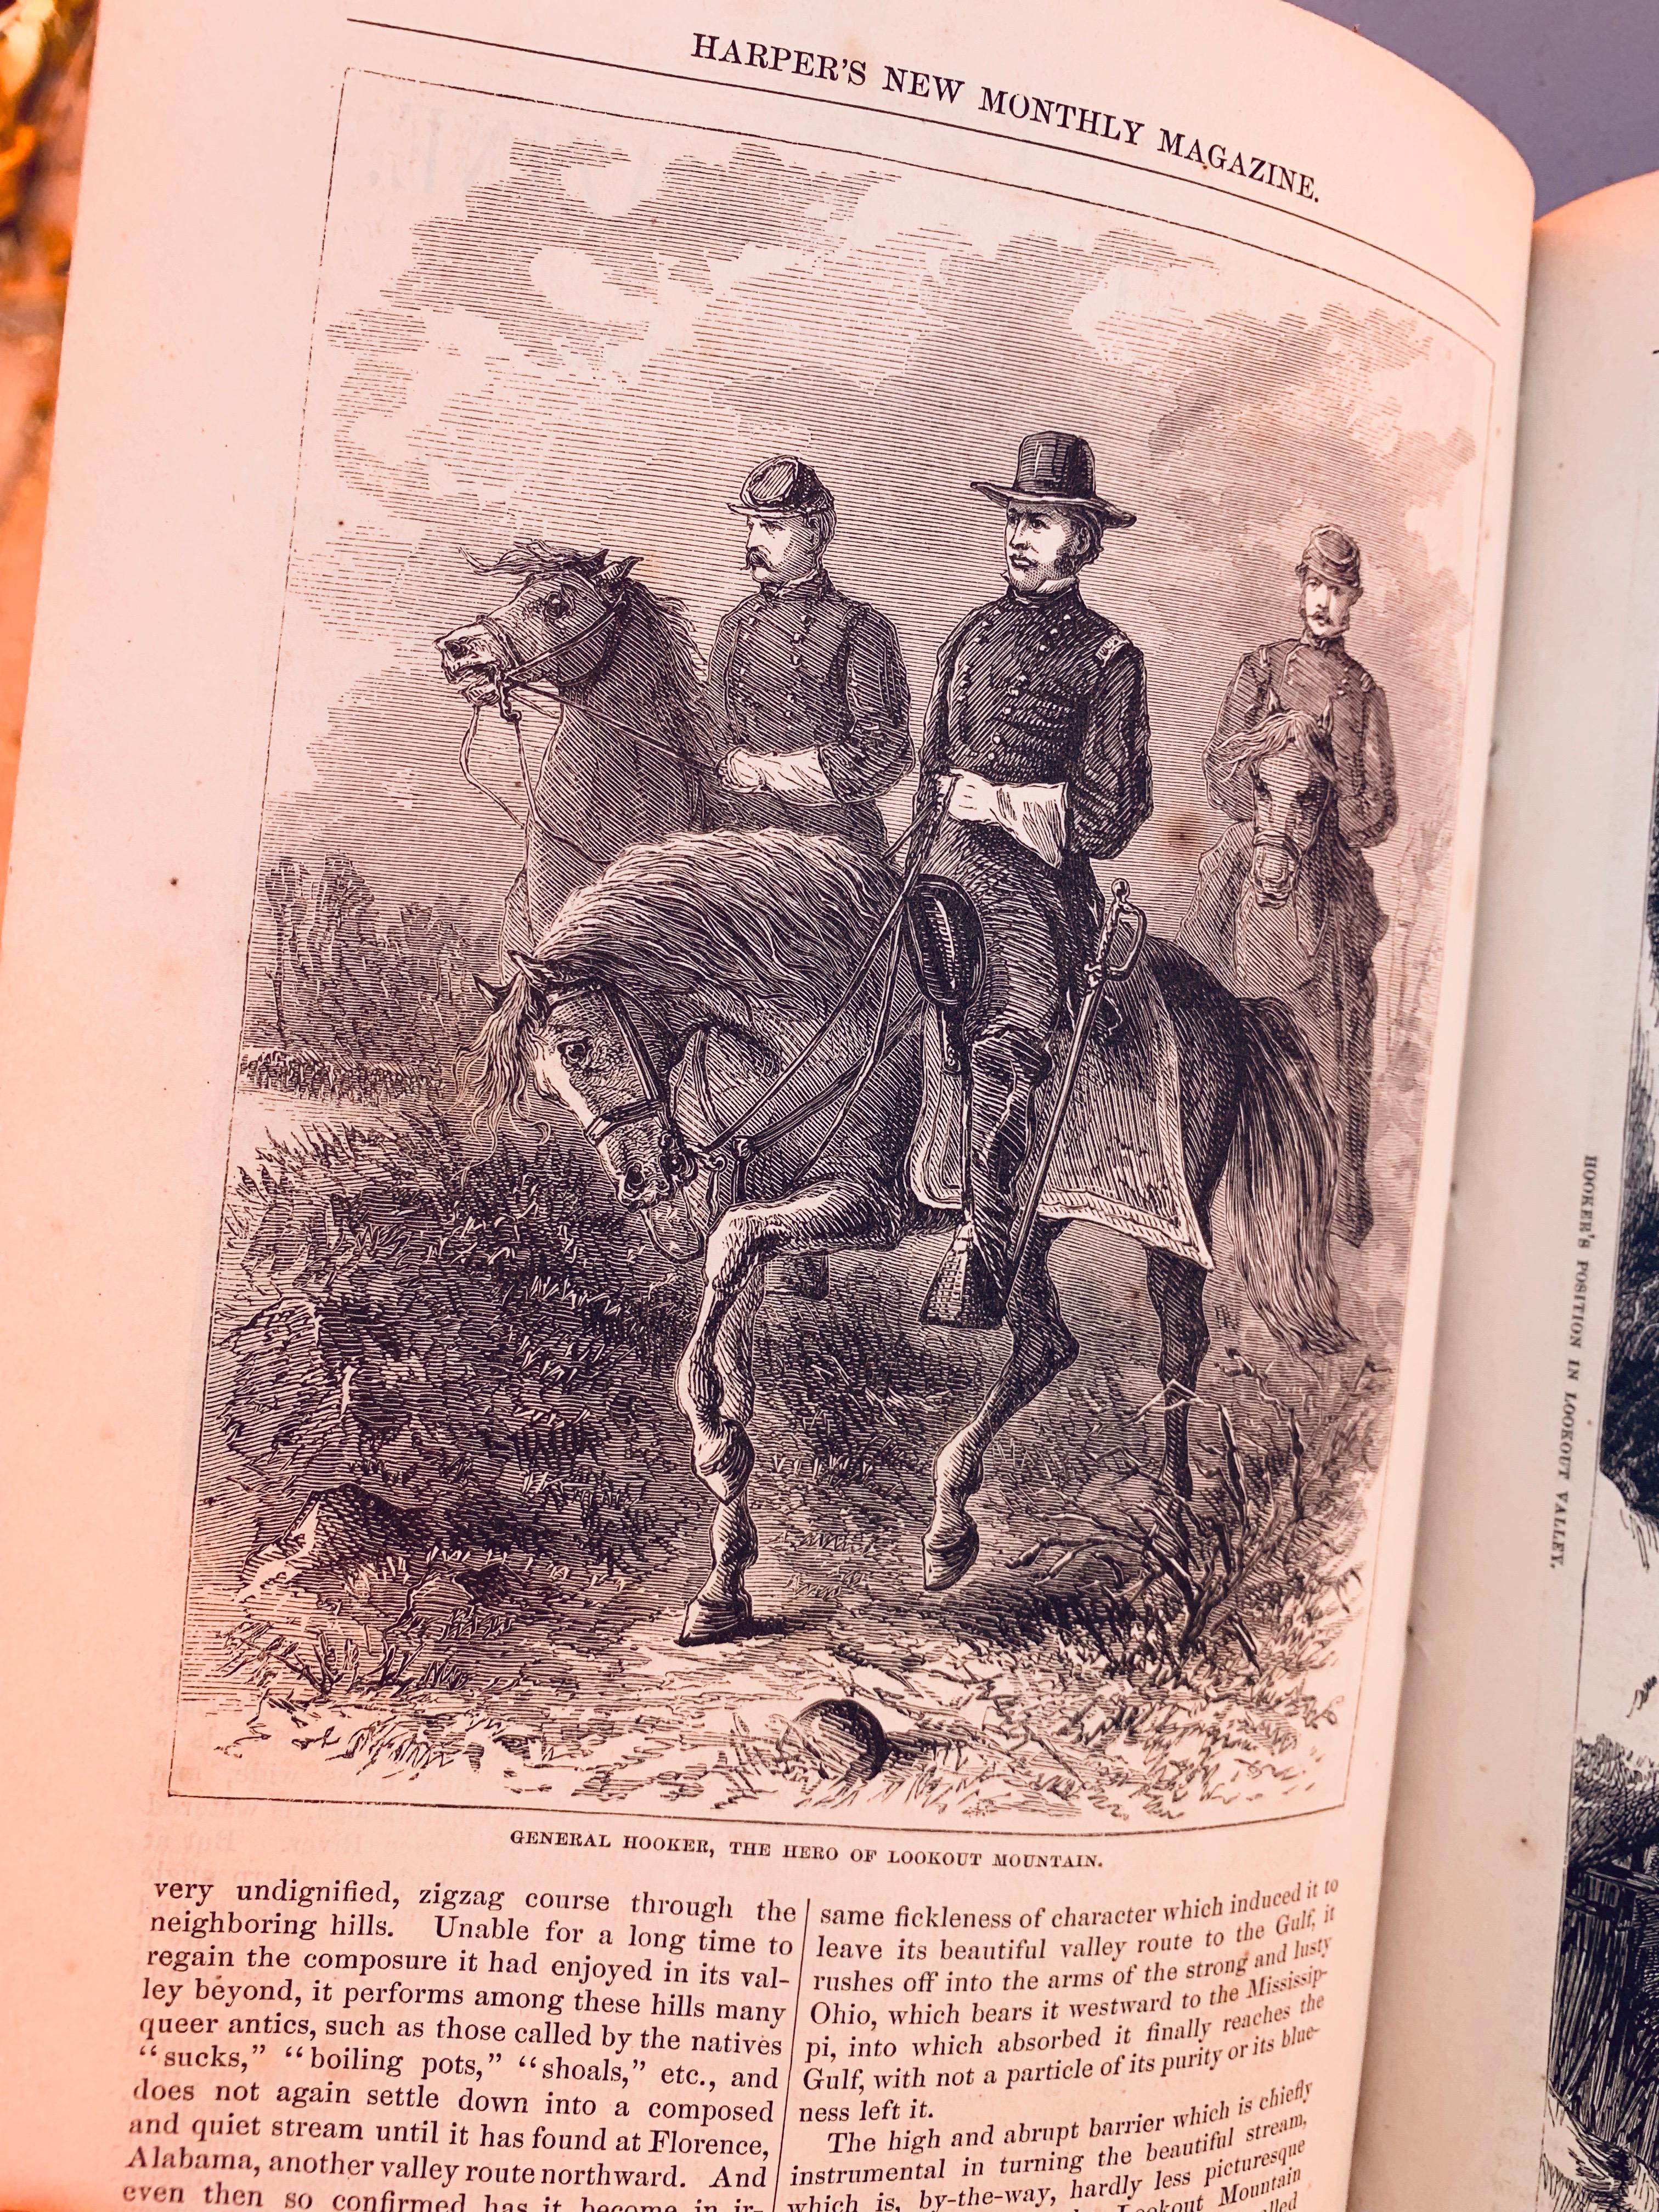 Harper's New Monthly Magazine BOUND (1868) LOOKOUT MOUNTAIN and How We Won It - CIVIL WAR MEMOIR